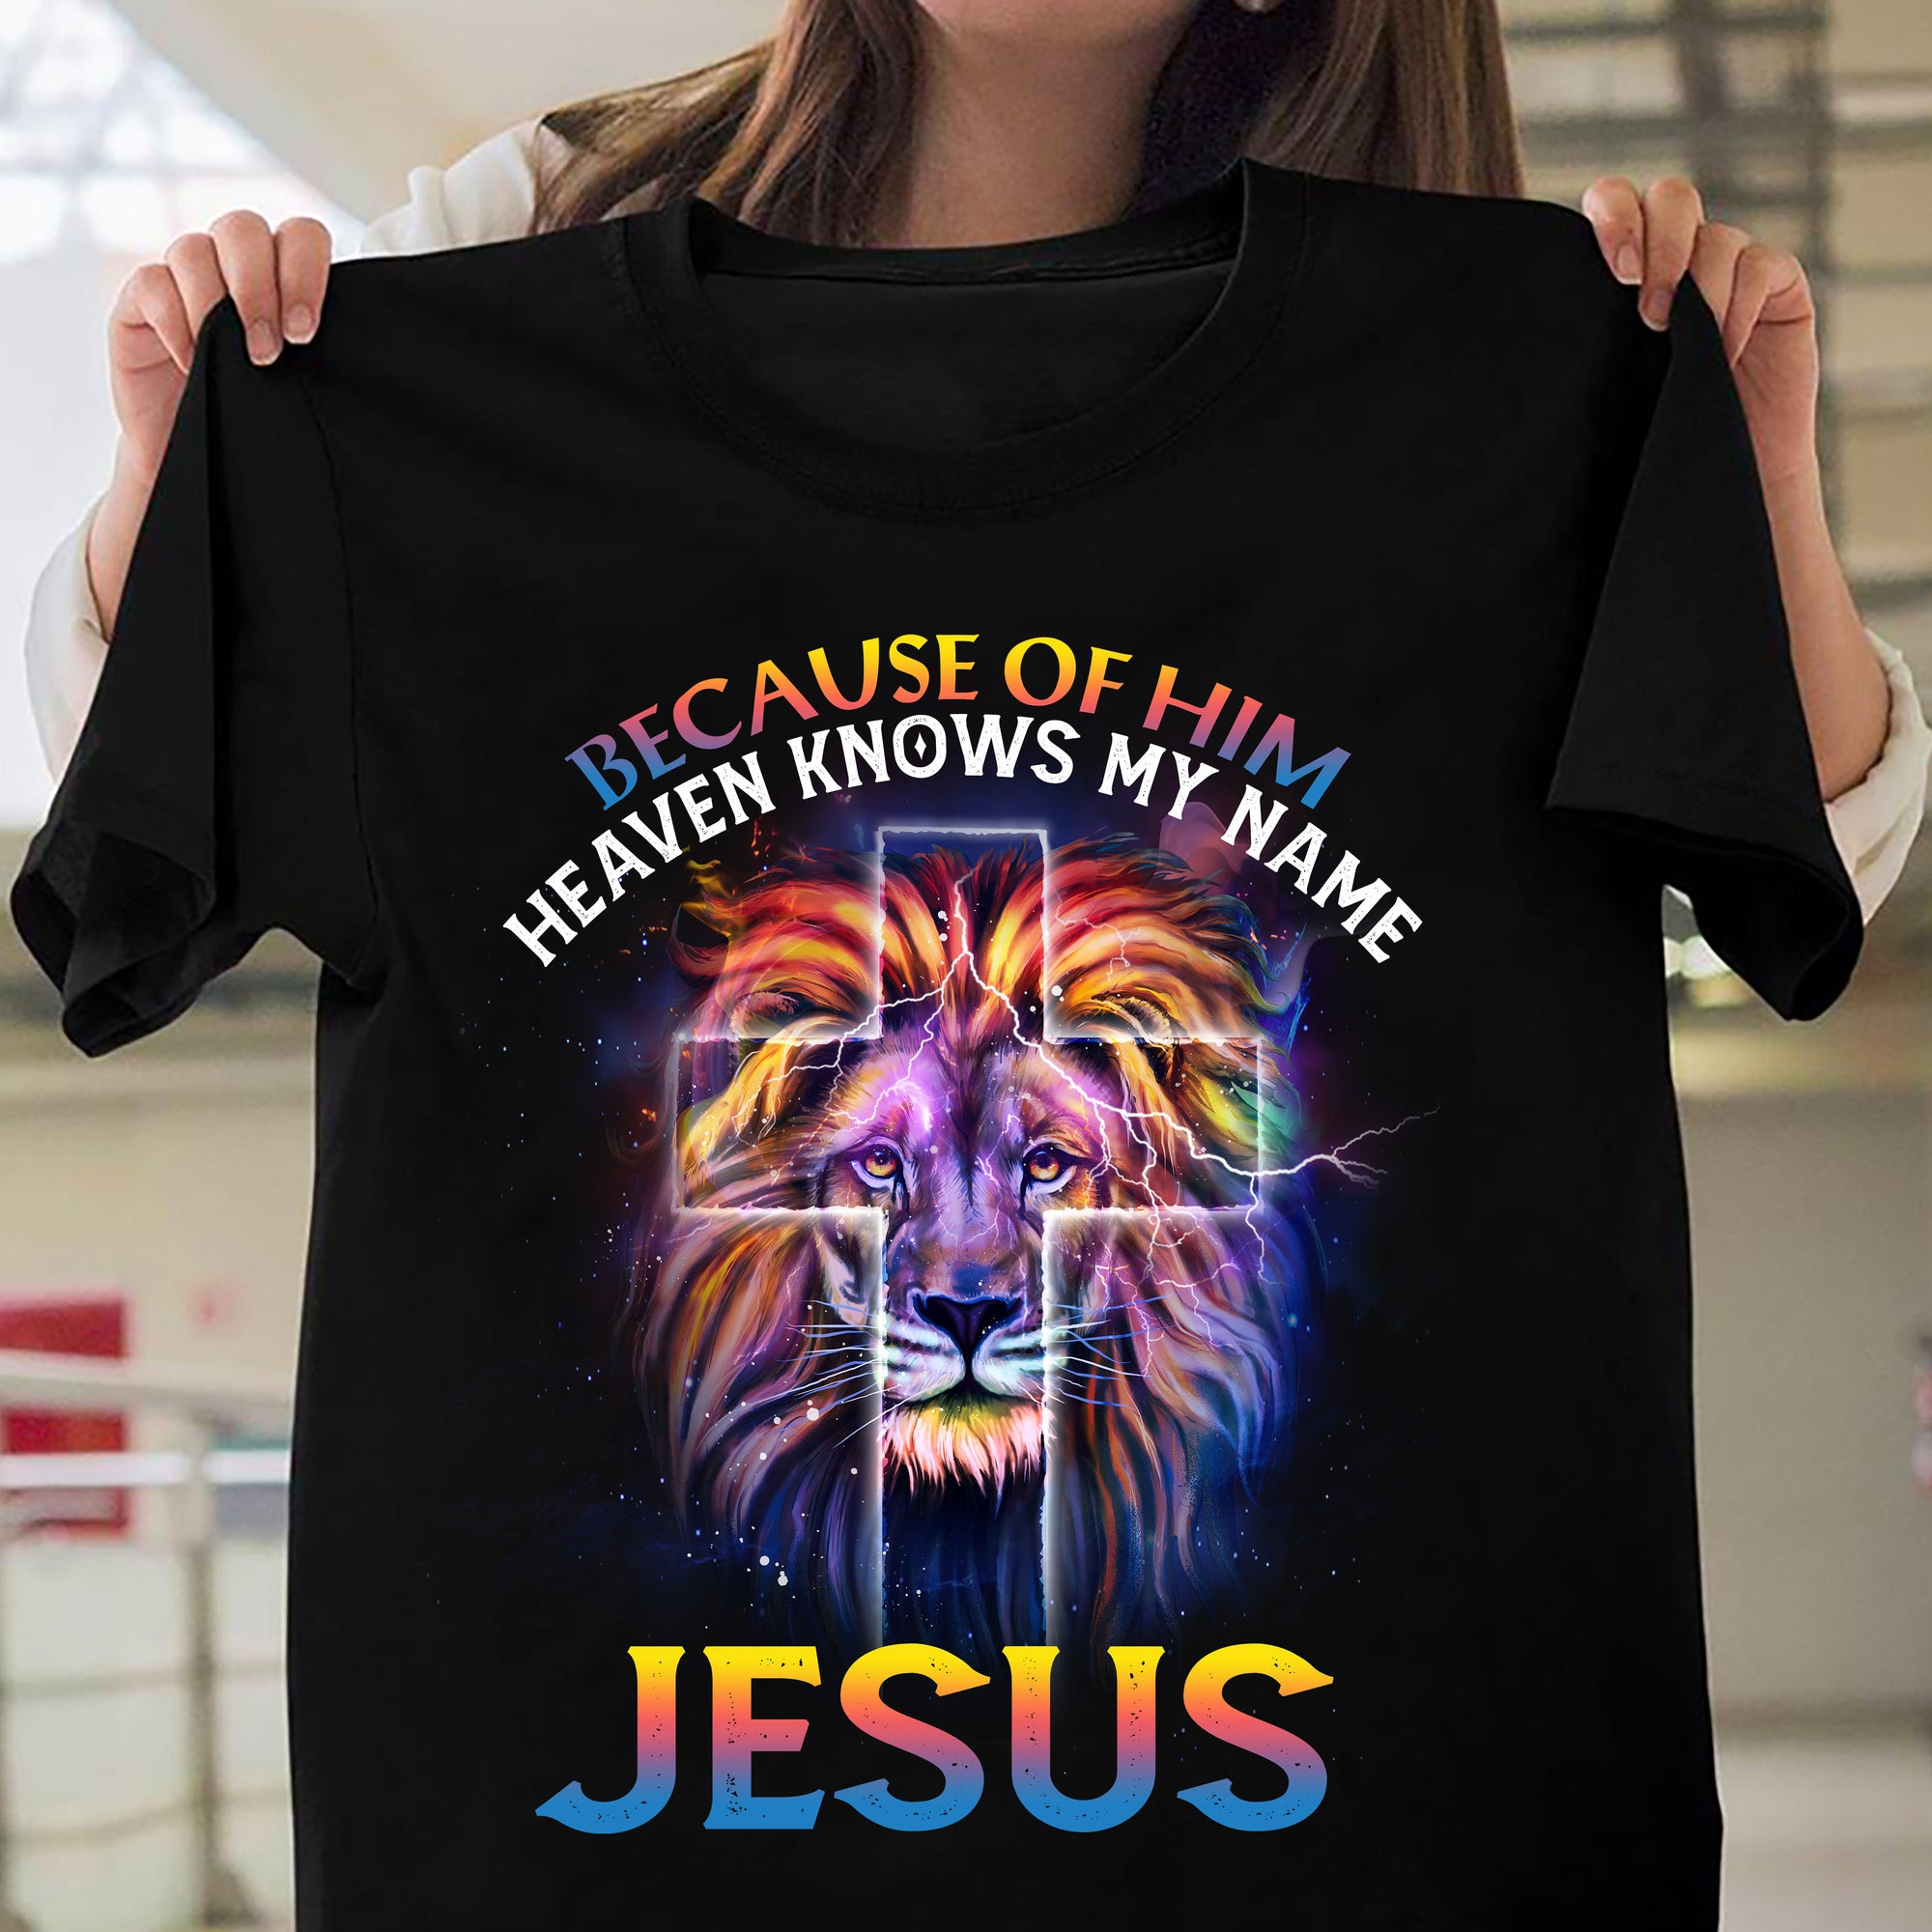 The lion of Judah, Awesome night sky, Because of him heaven knows my name - Jesus Black Apparel